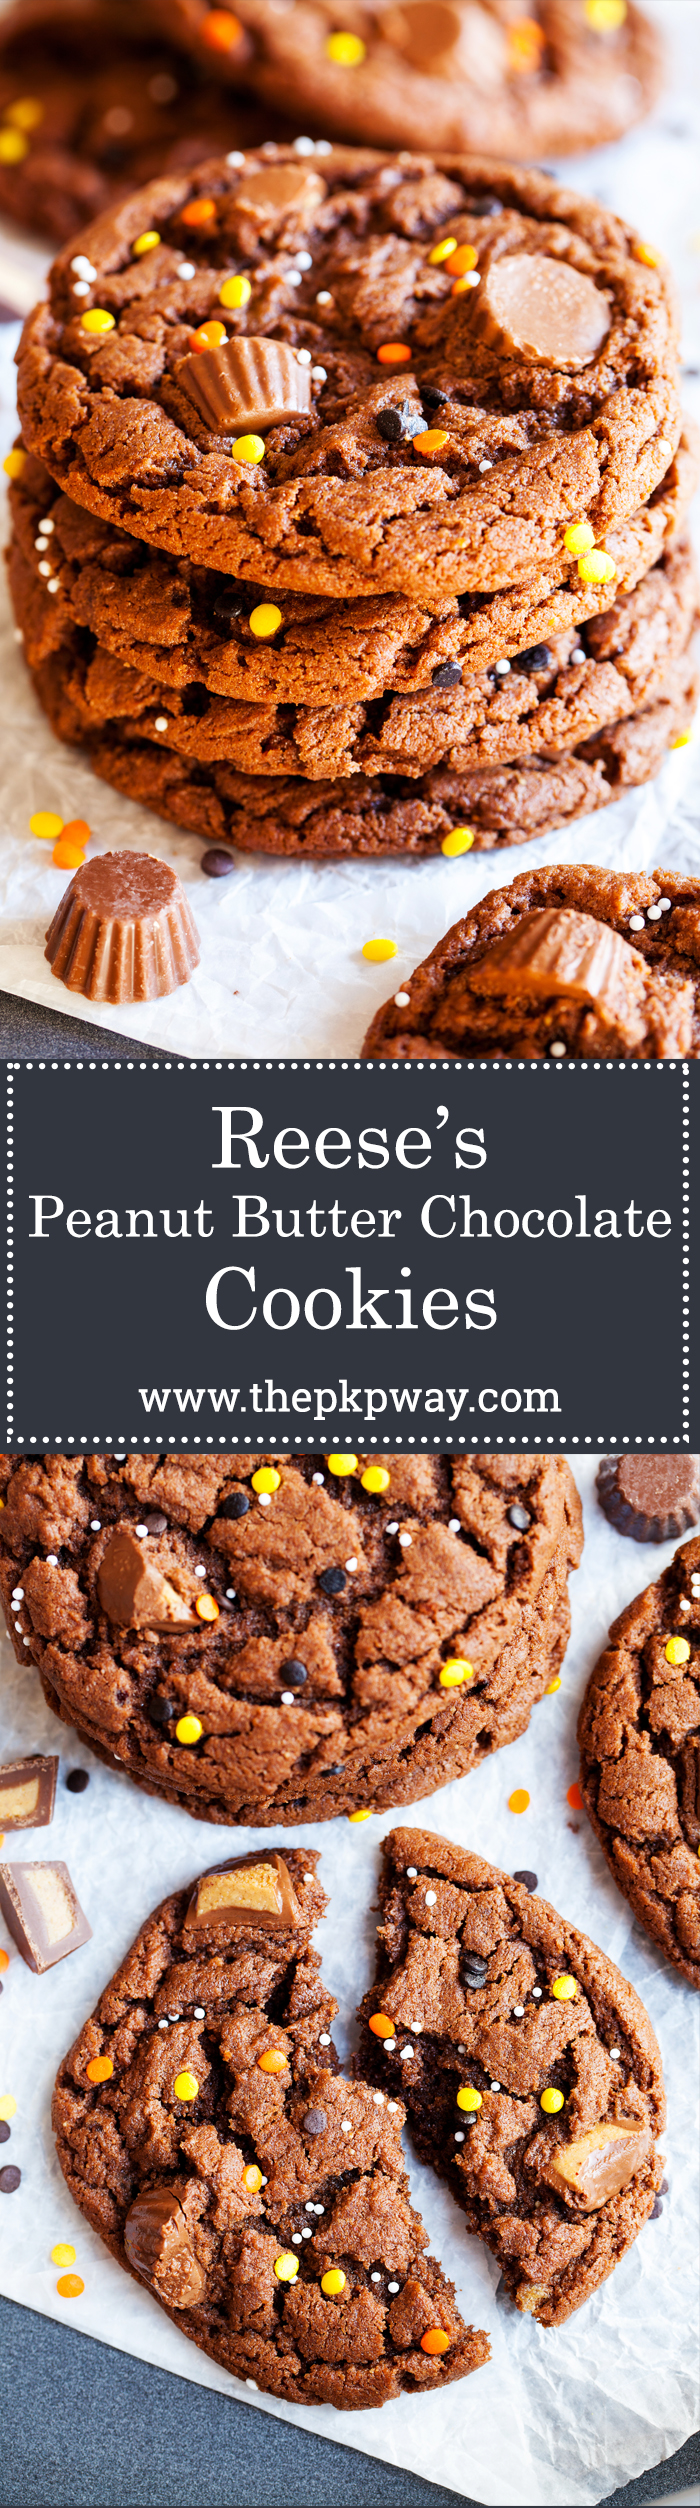 Full of chocolate and peanut butter flavor, these Reese’s Peanut Butter Chocolate Cookies are a great way to use up your leftover Halloween candy.